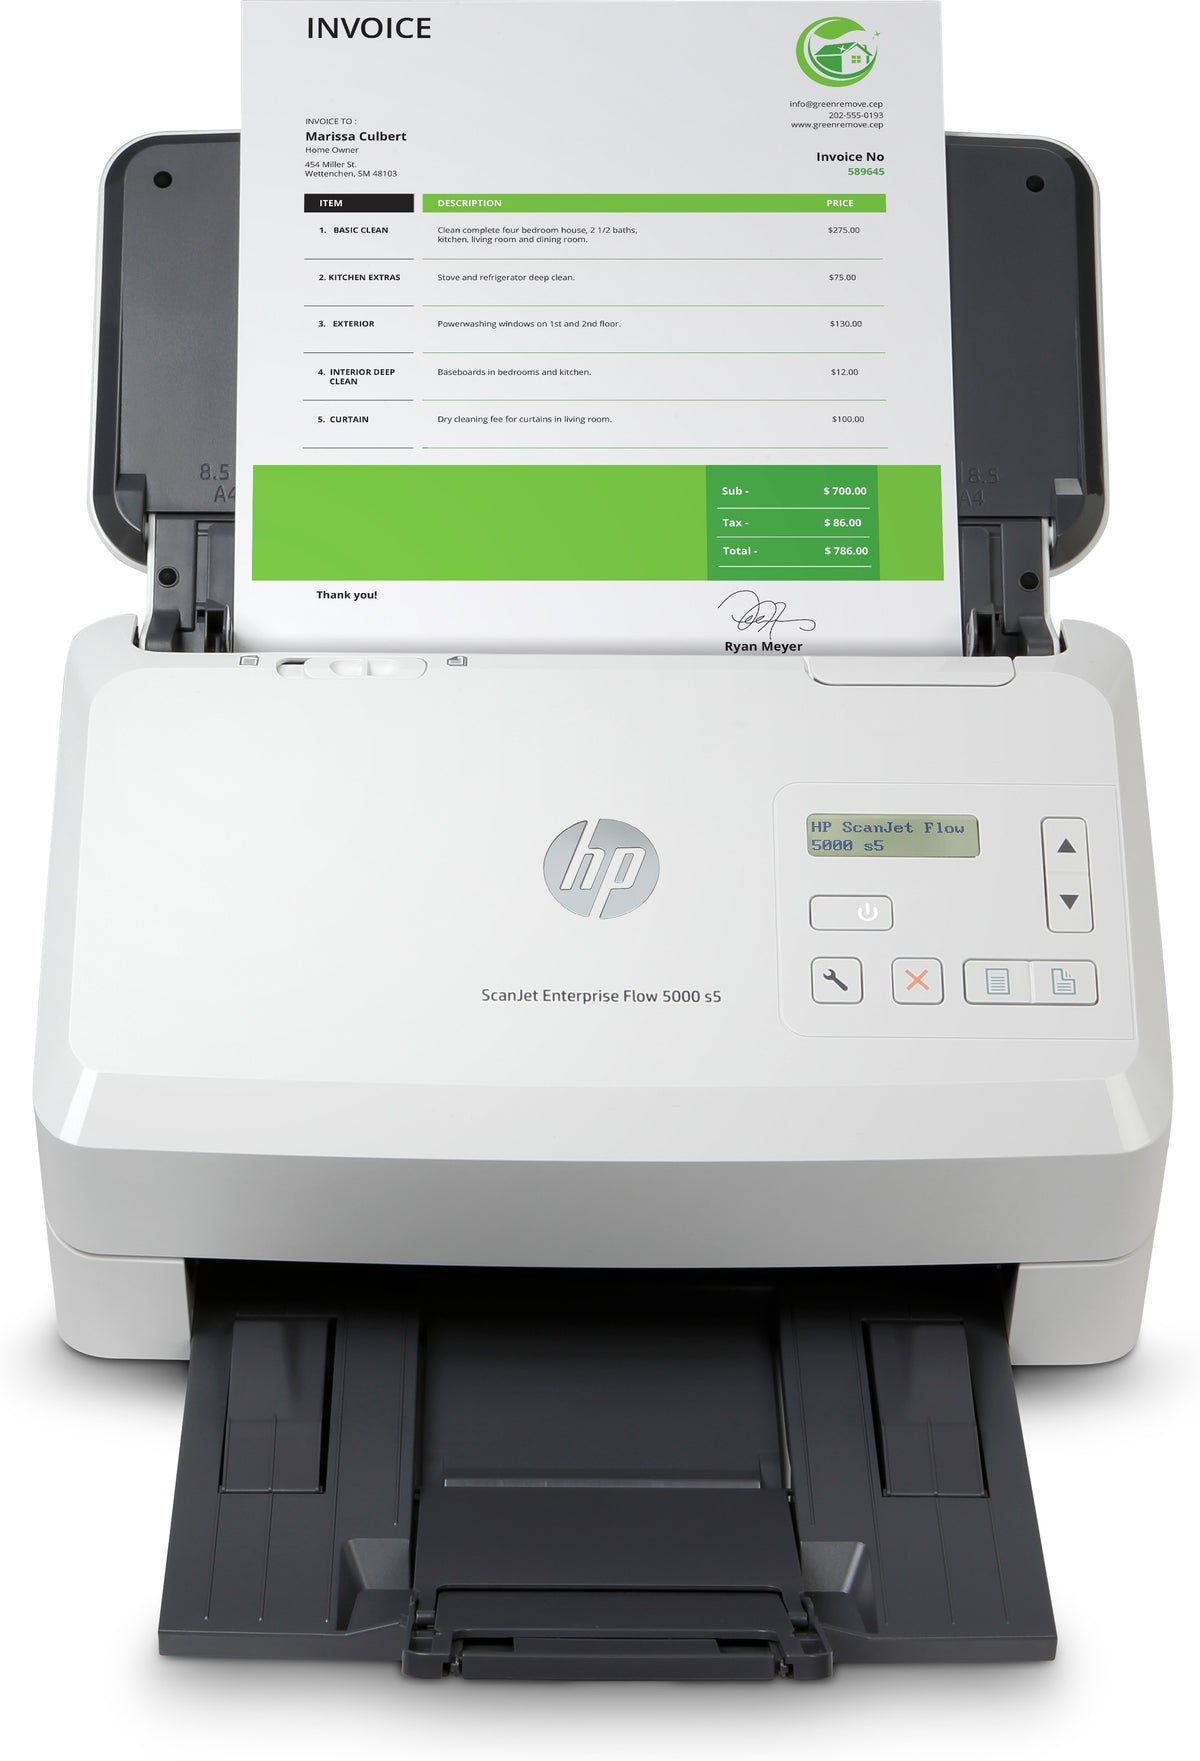 HP ScanJet Enterprise Flow 5000 s5 - Document Scanner - CMOS/CIS - Duplex - 216 x 3100 mm - 600 dpi x 600 dpi - up to 65 ppm (mono) / up to 65 ppm (color) - ADF (80 sheets) - up to 7500 scans per day - USB 3.0